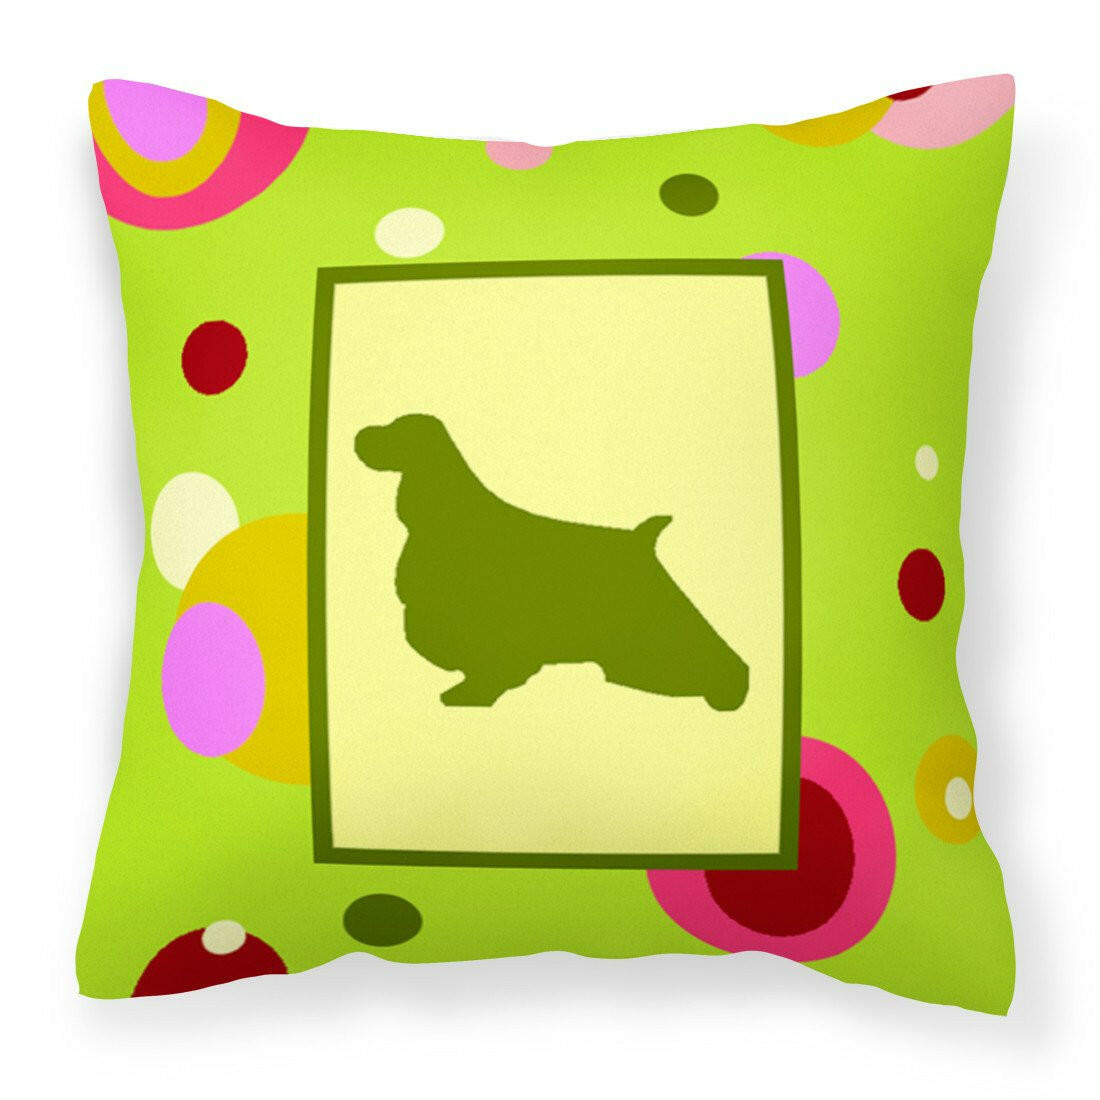 Lime Green Dots English Springer Spaniel Fabric Decorative Pillow CK1029PW1414 by Caroline's Treasures